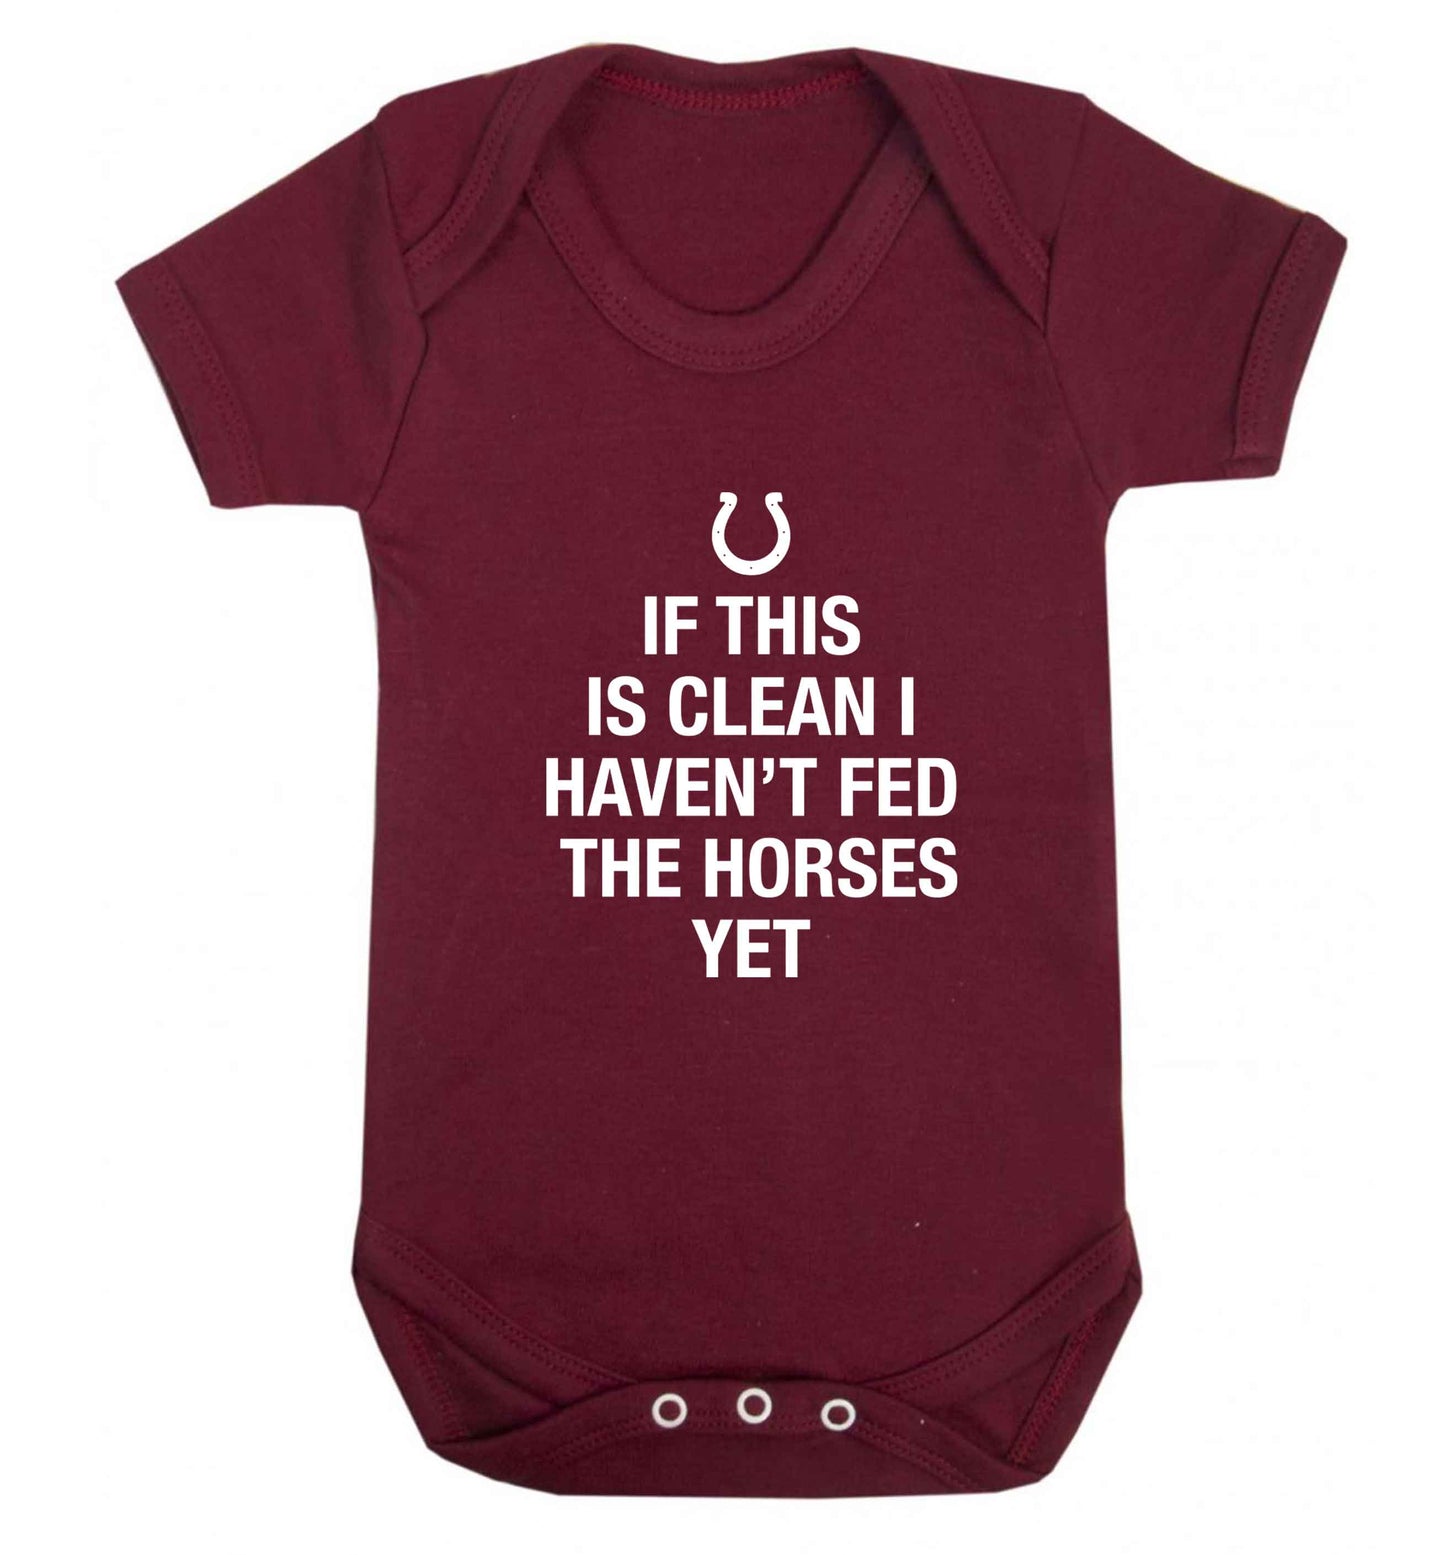 If this isn't clean I haven't fed the horses yet baby vest maroon 18-24 months